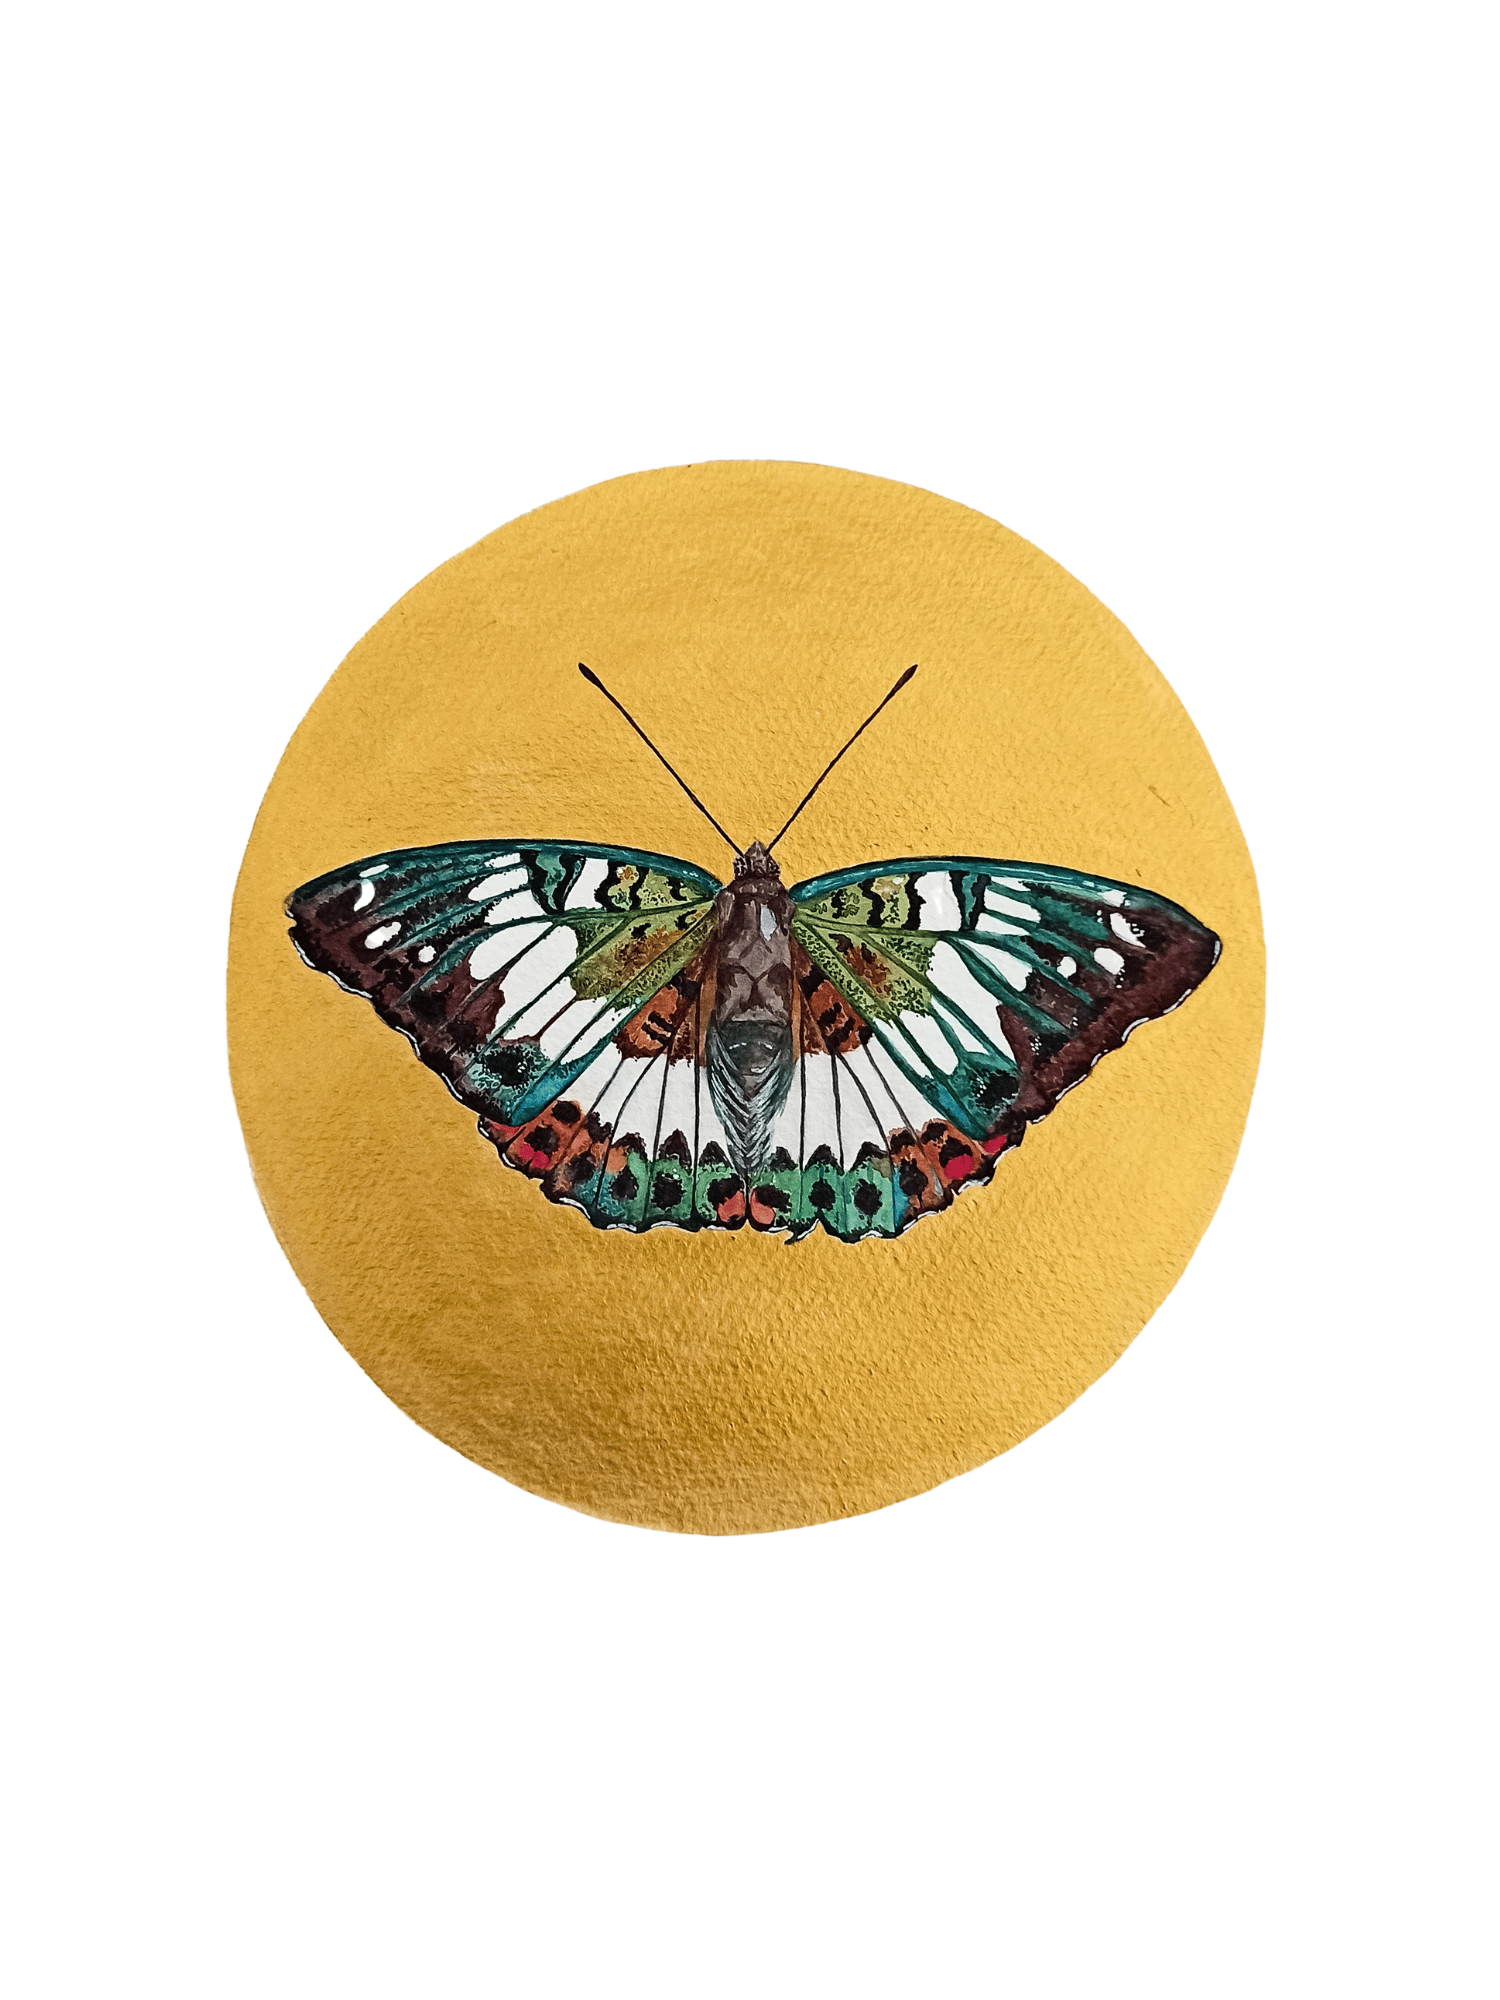 Image of Gaudy Baron Butterfly LIMITED EDITION PRINT